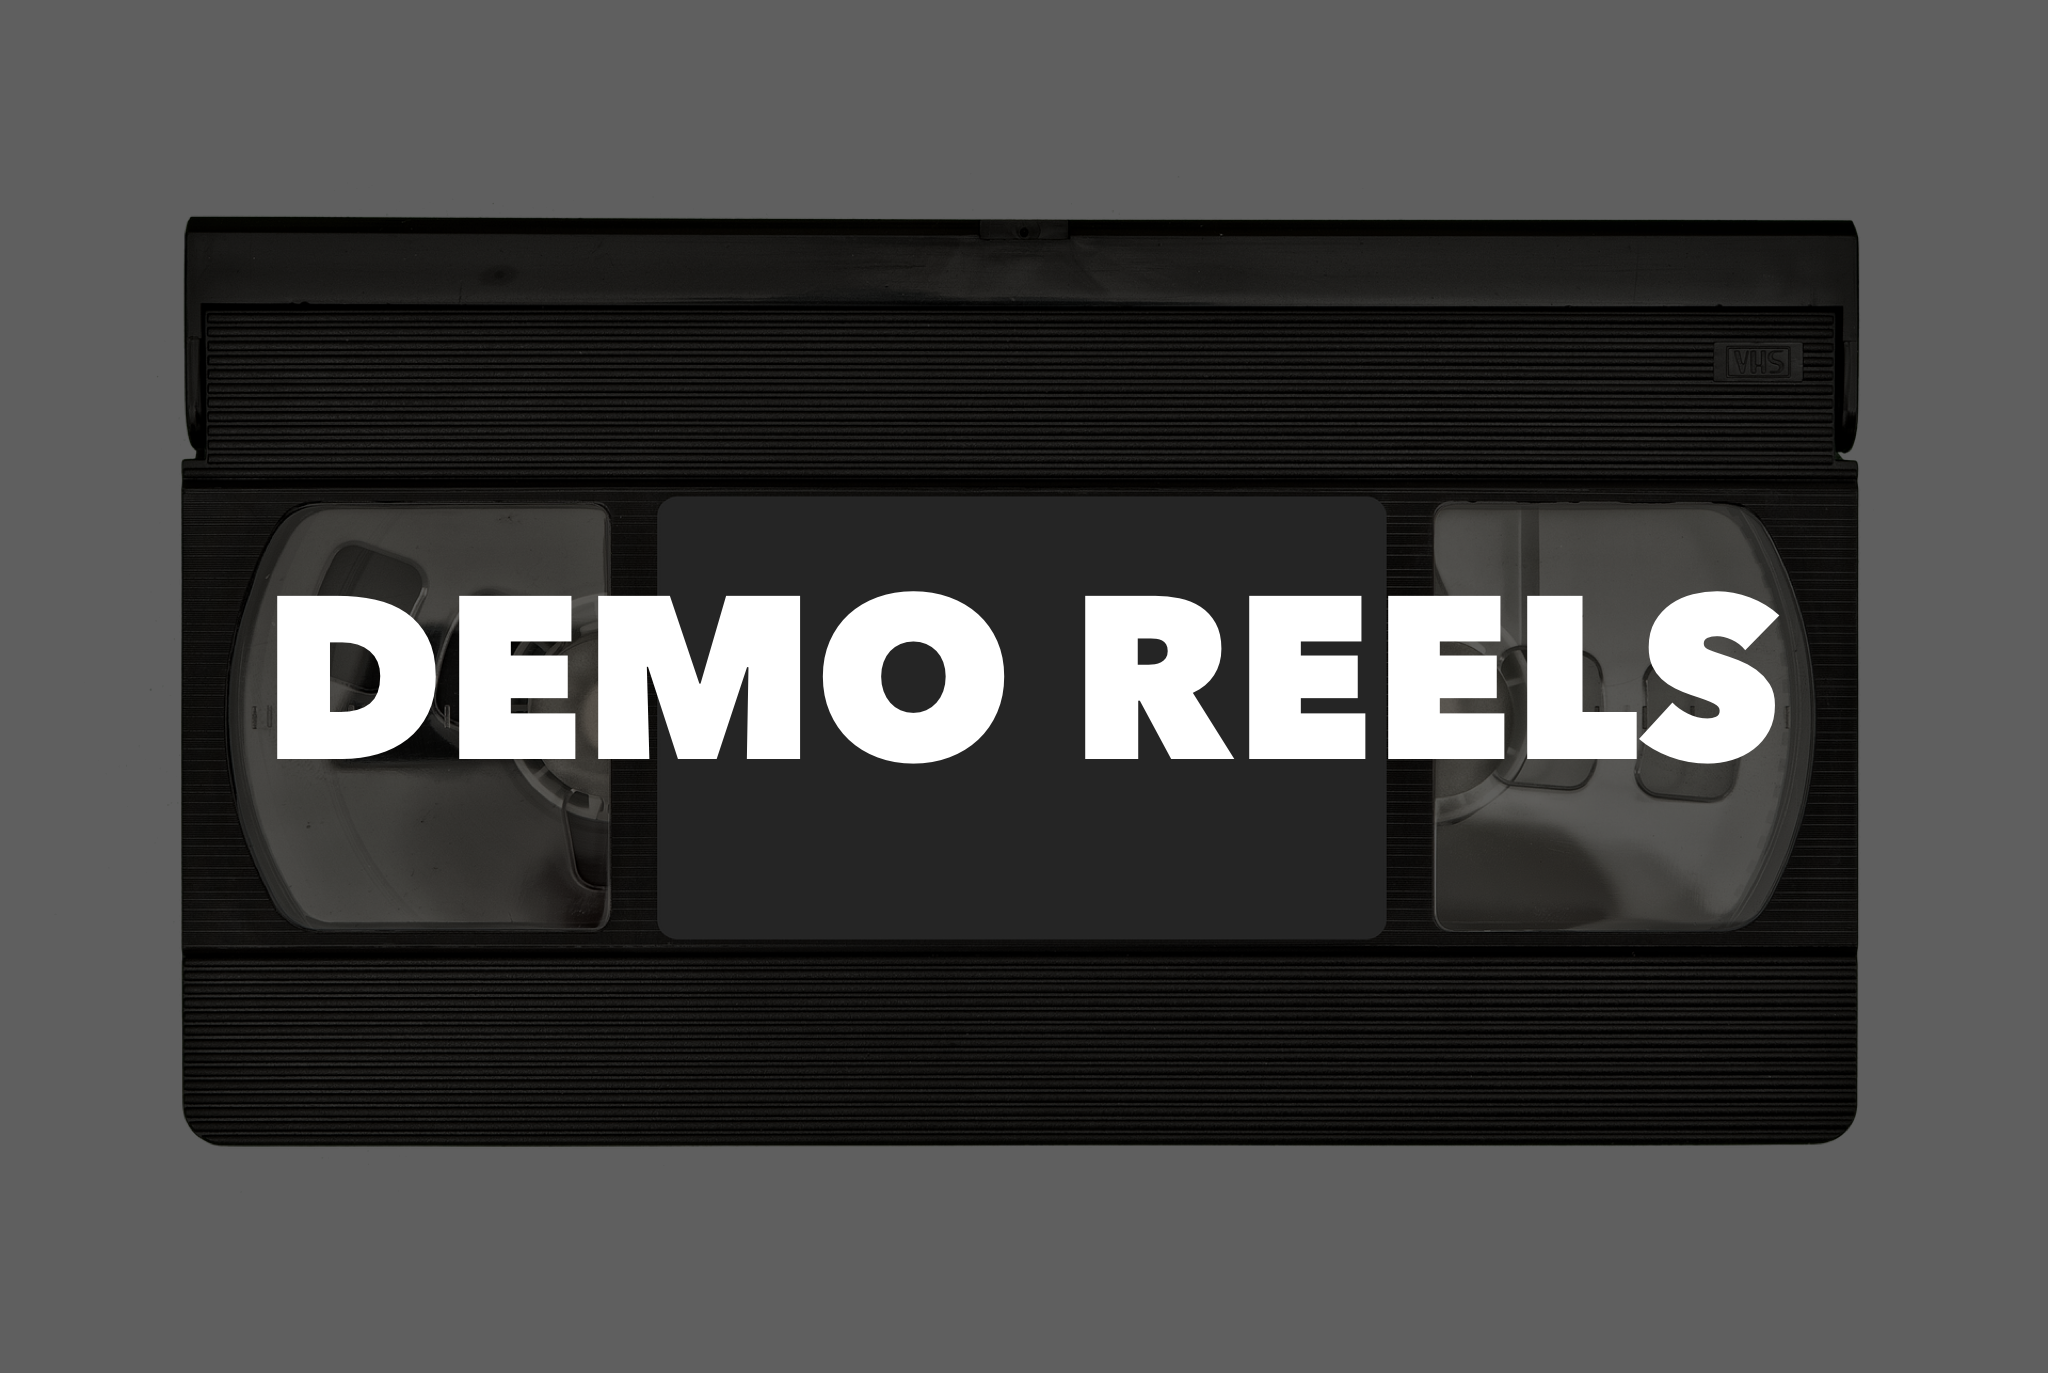 how to build a television demo reel